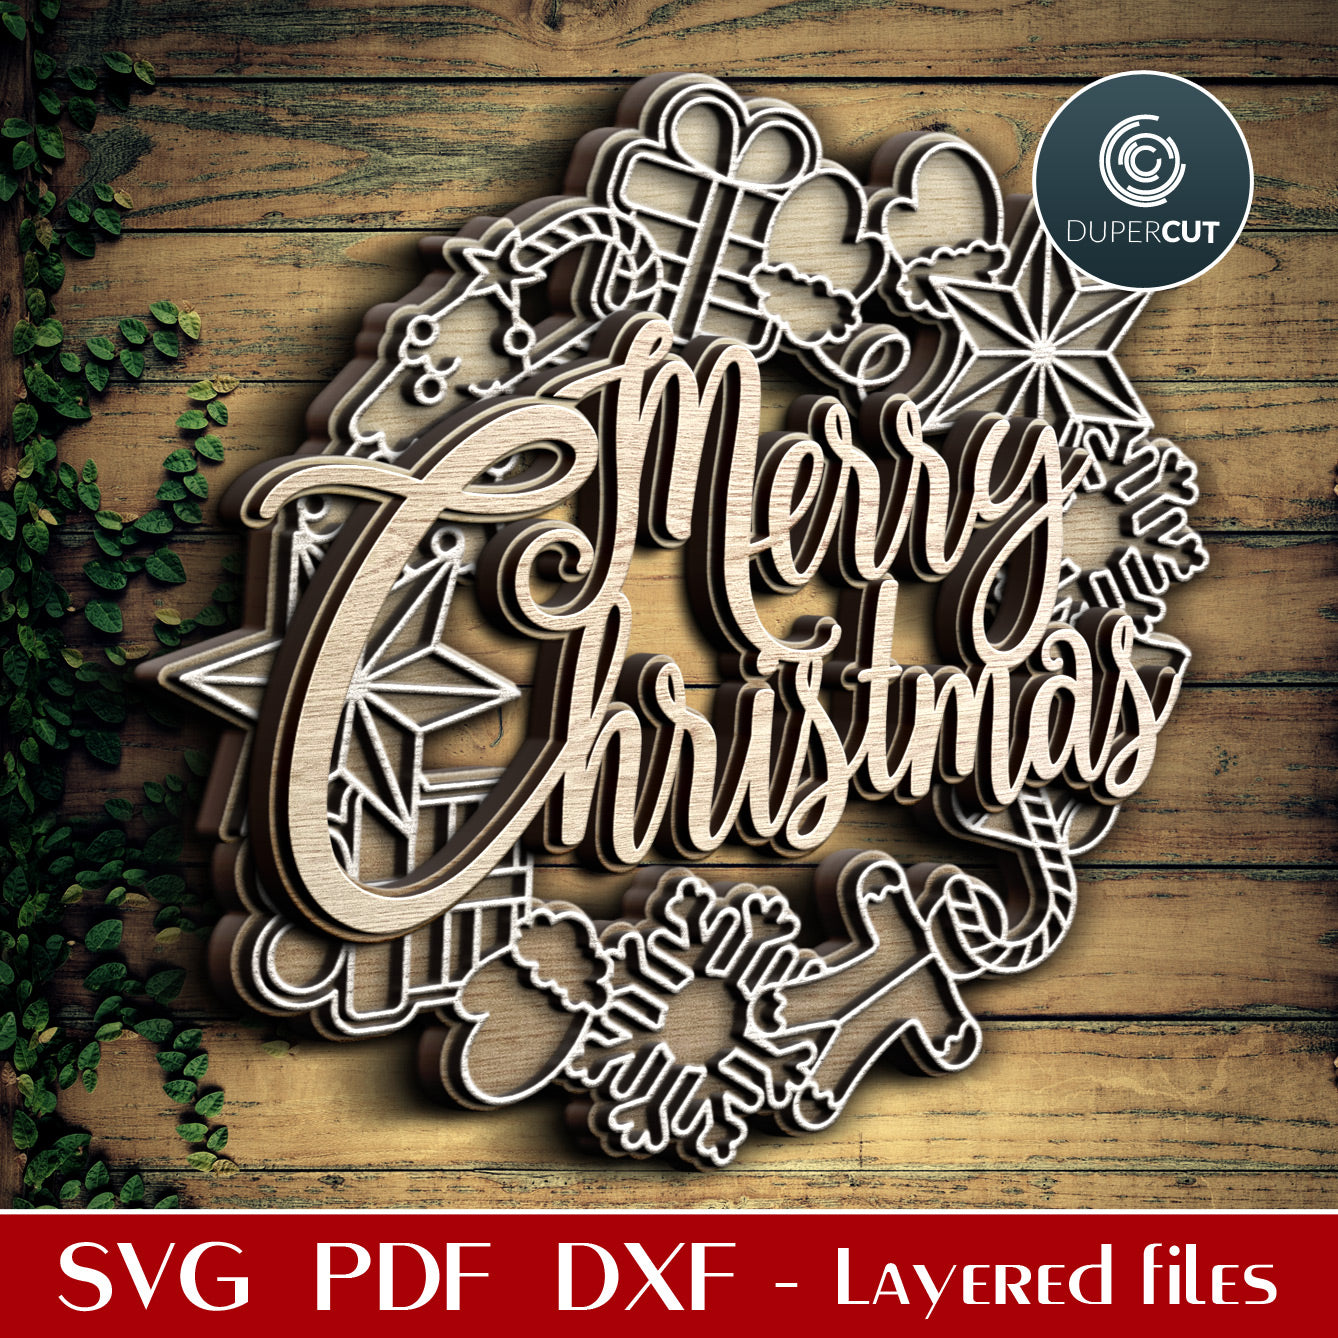 Holiday wreath door hanger - Merry Christmas sign - SVG PDF DXF layered files for laser and digital cutting machines - Glowforge, Cricut, Silhouette, CNC plasma by DuperCut